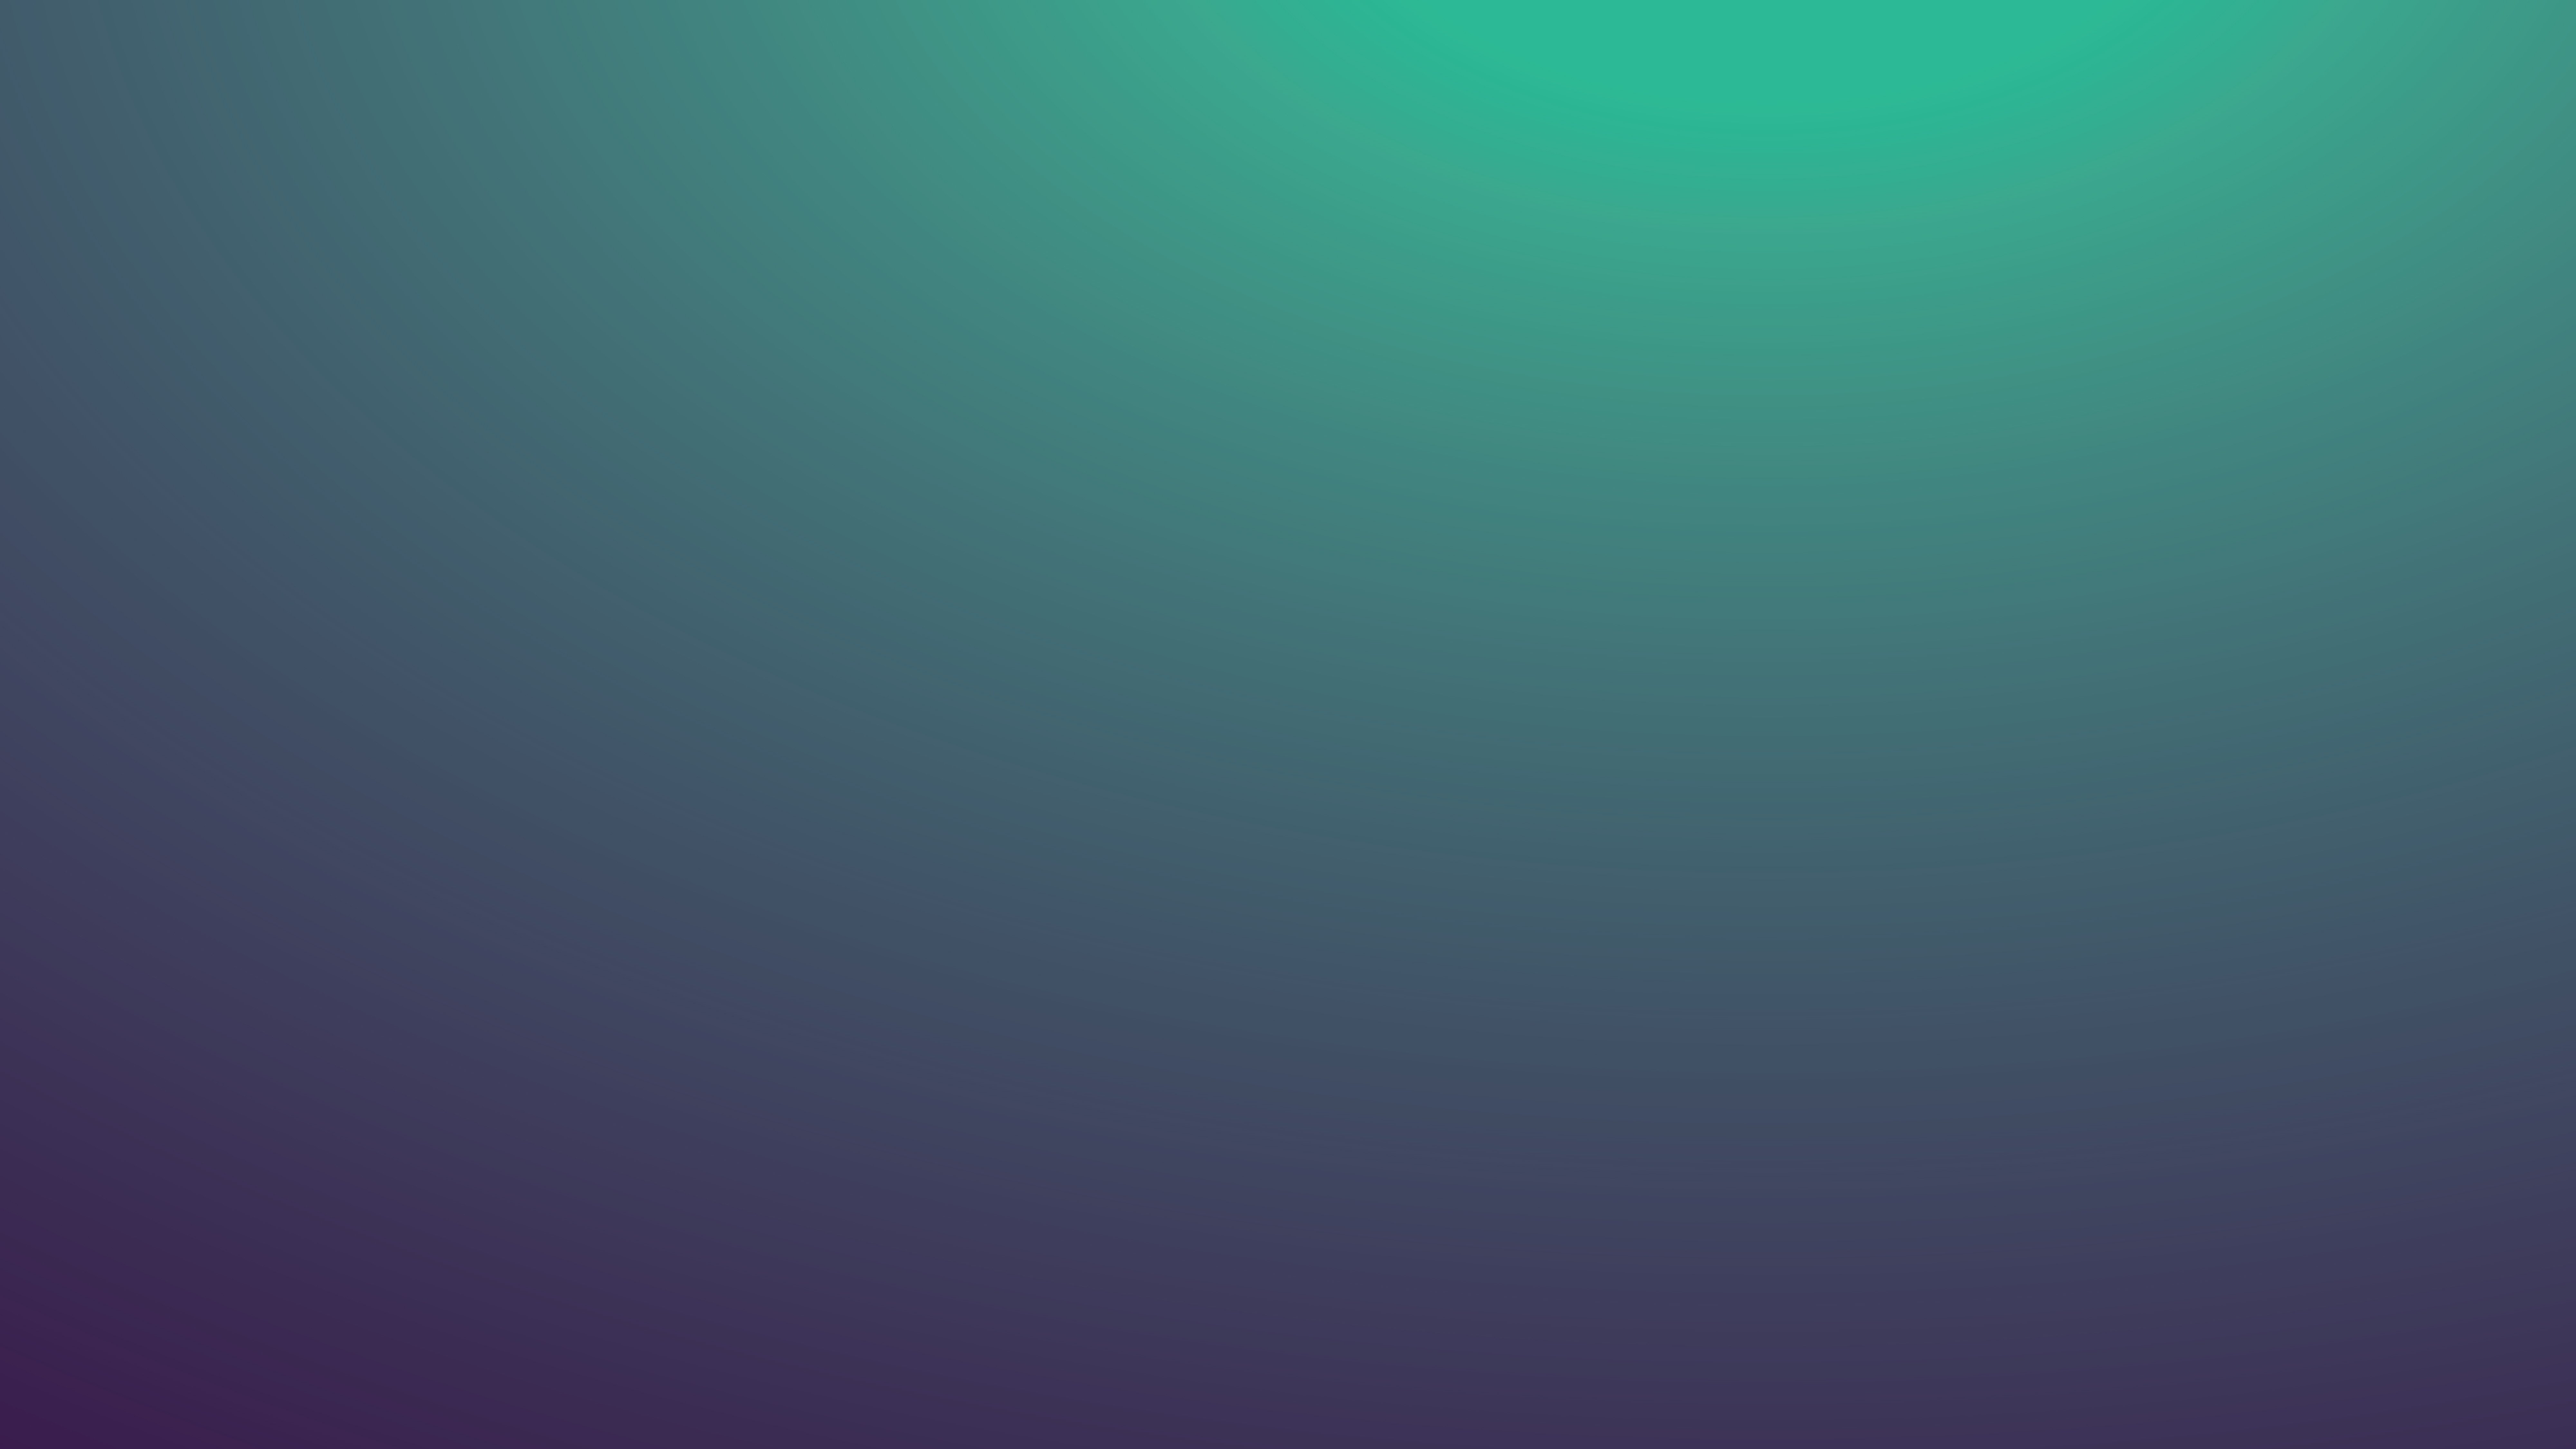 Mongoose Gradient Background Blue Teal